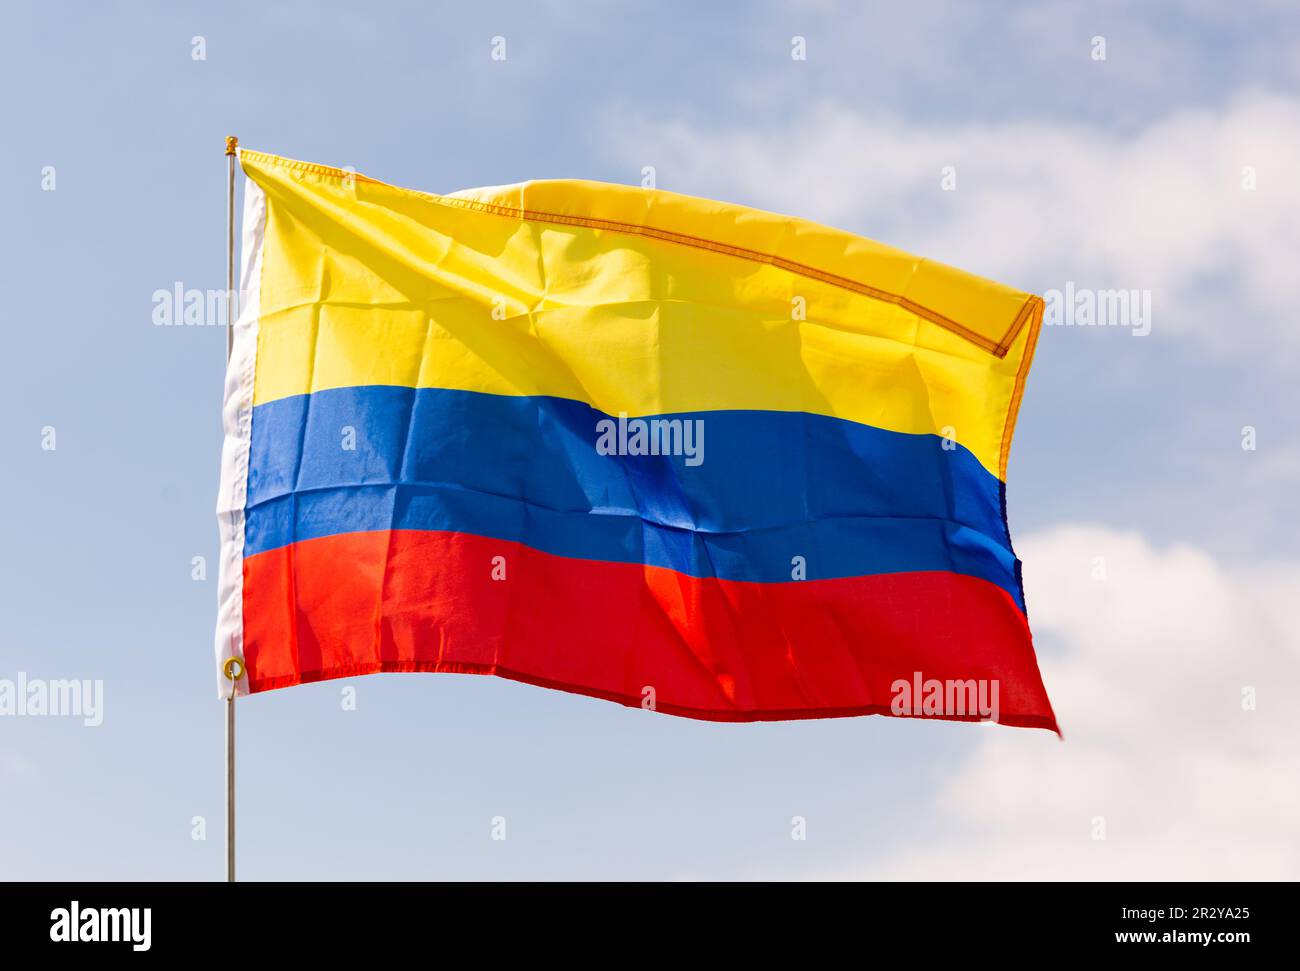 National flag of Colombia waving on flagpole against blue sky Stock Photo